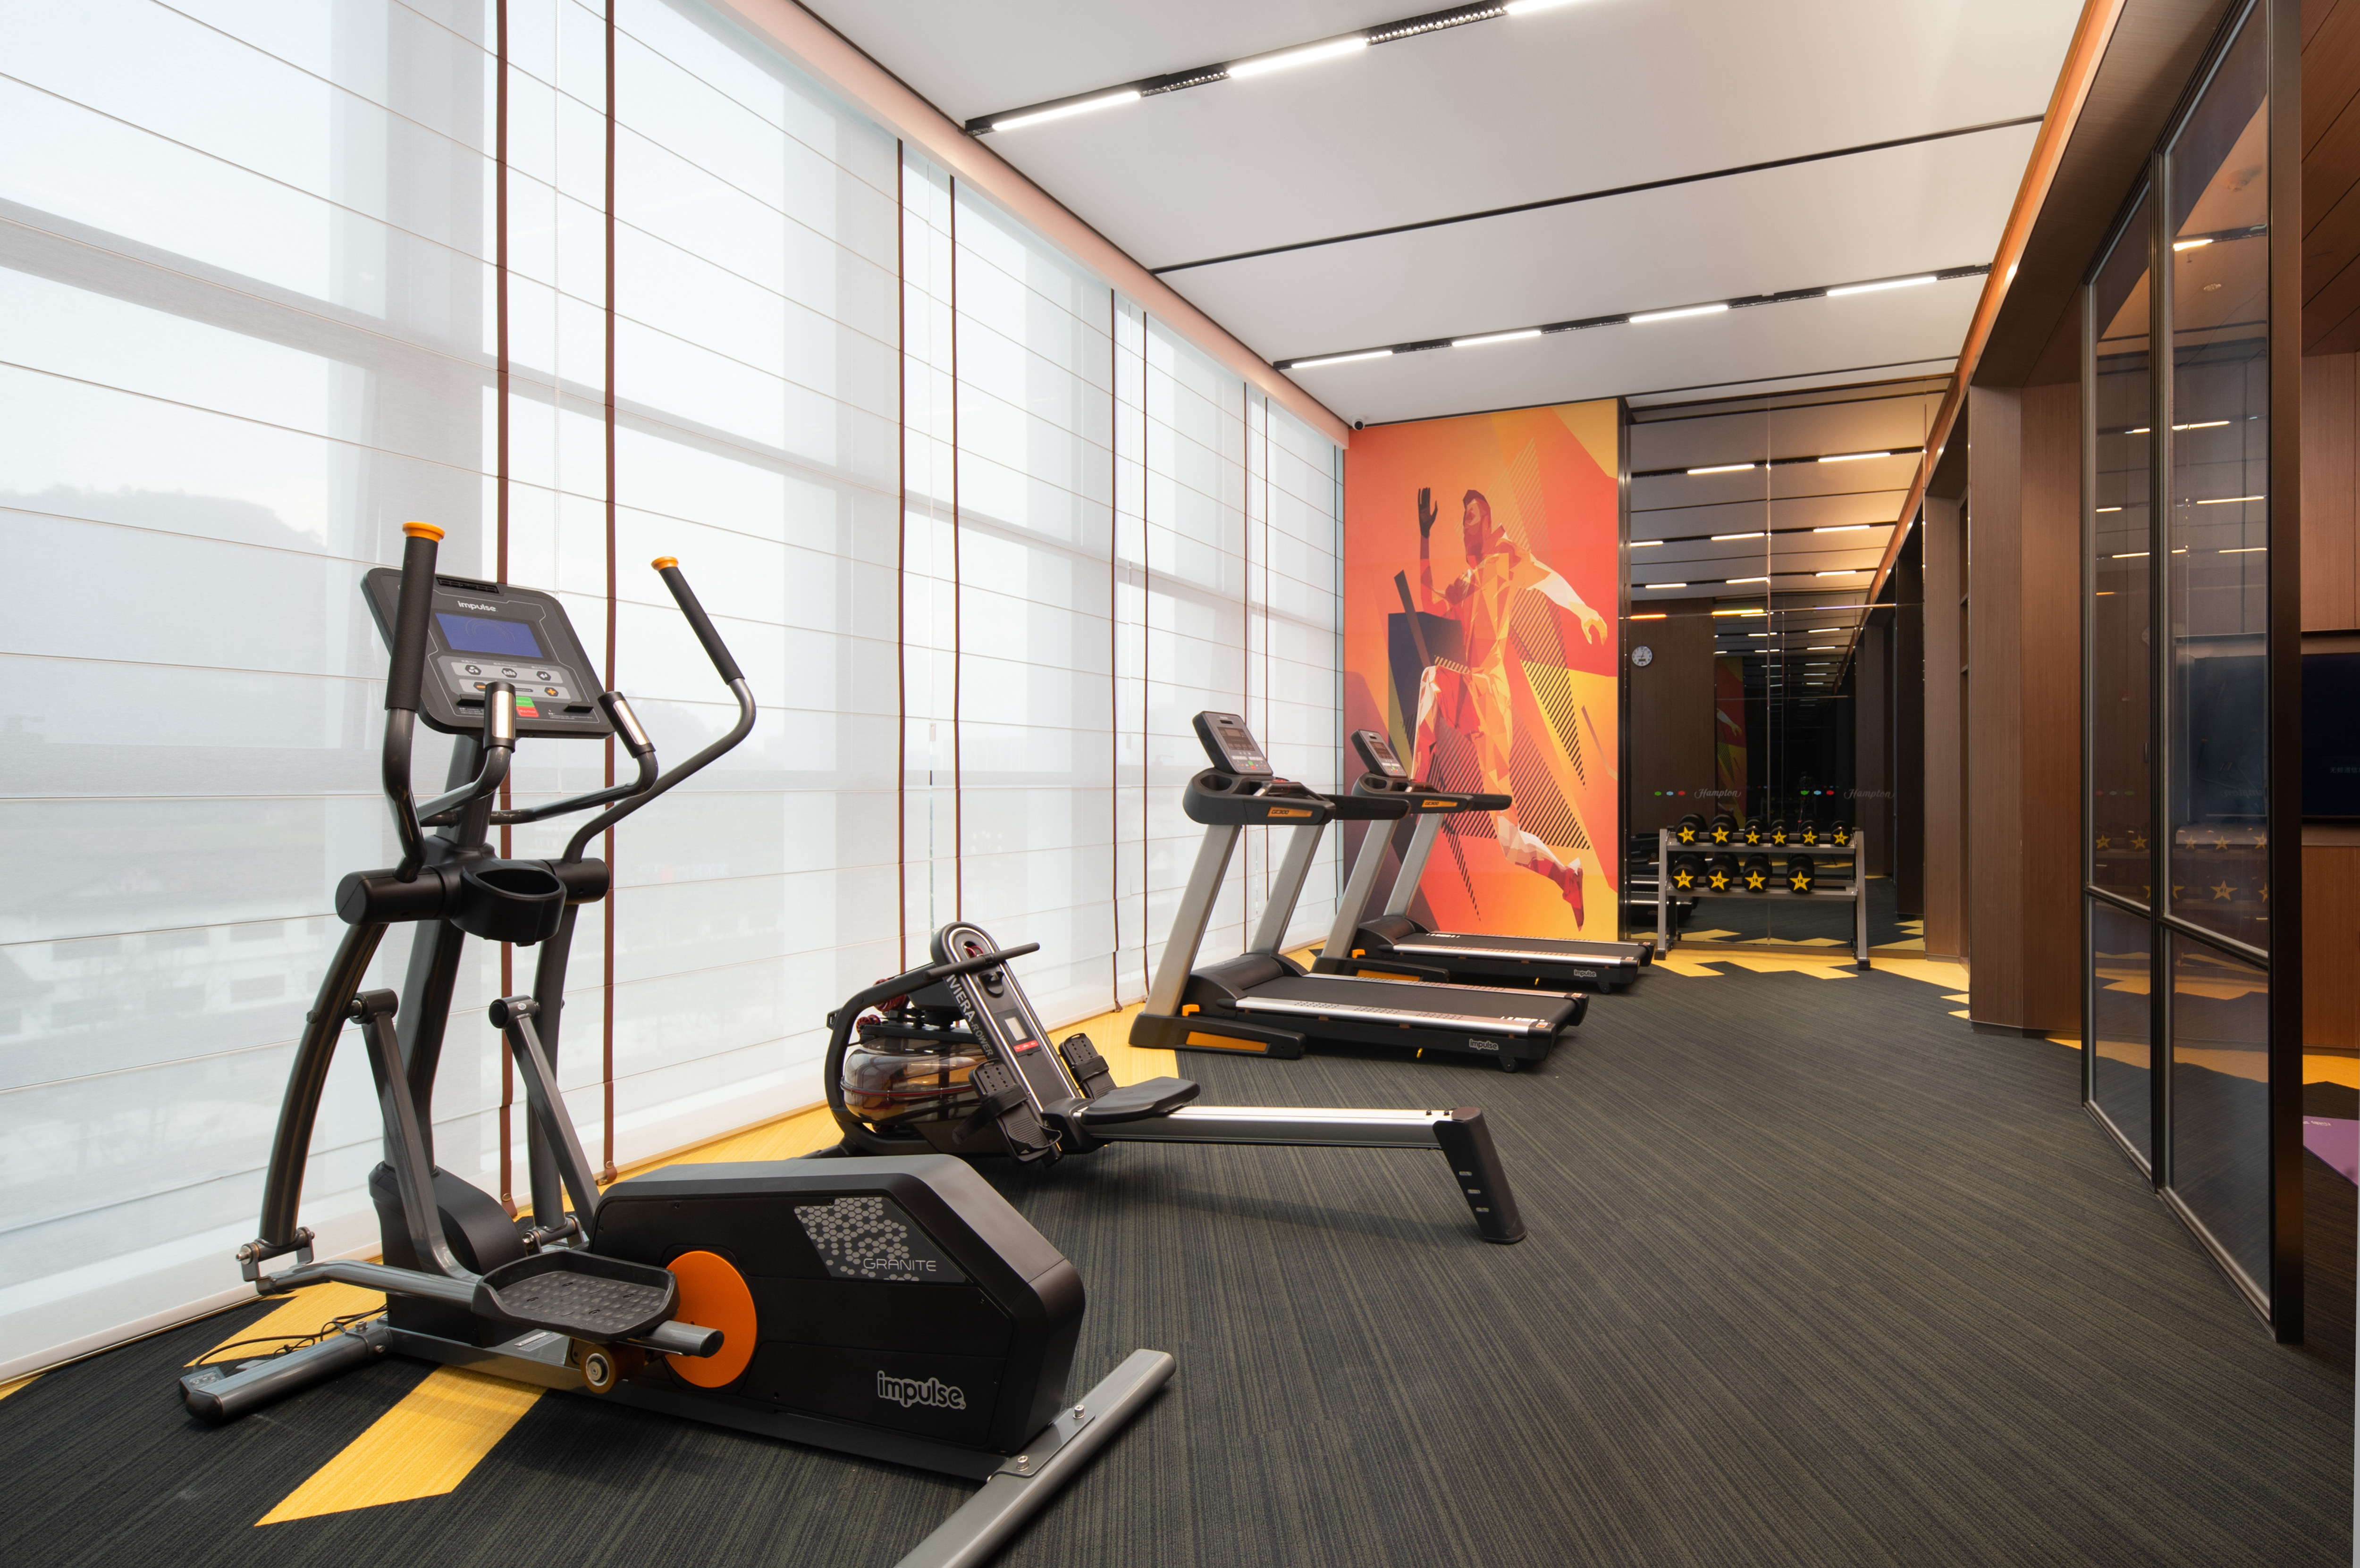 Treadmills and Exercise Bike in Fitness Center